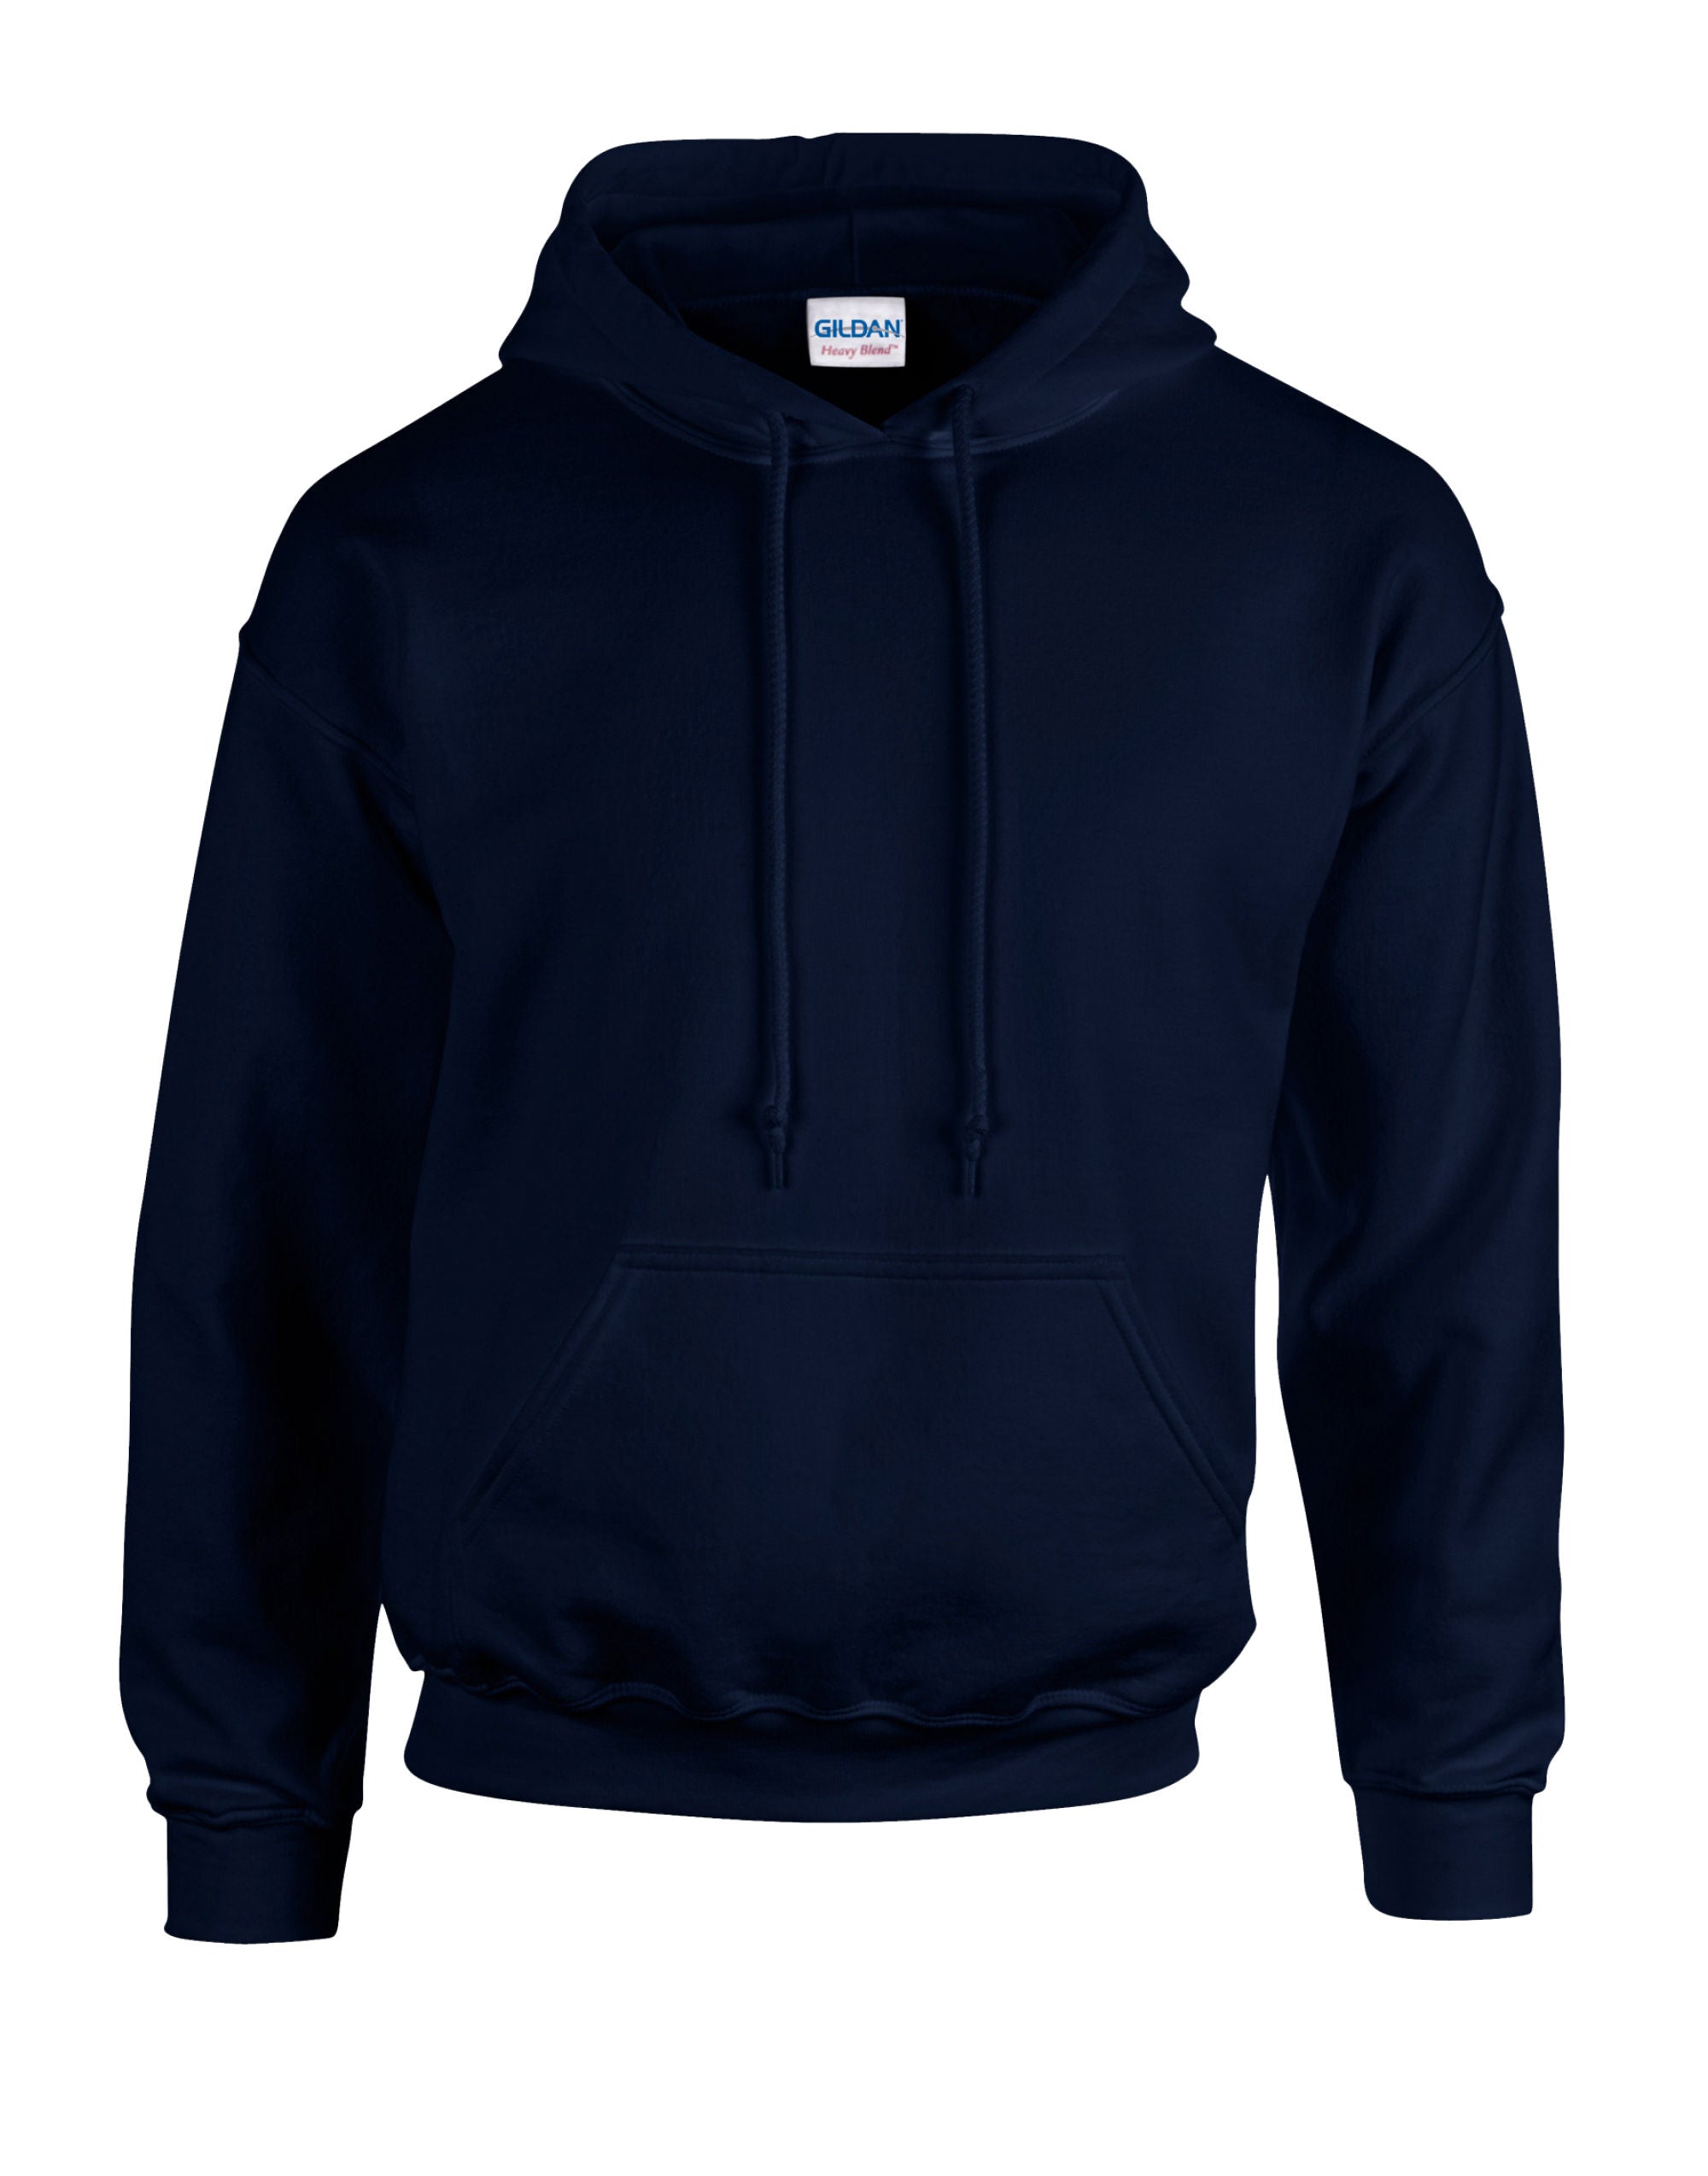 5 x Hoodies with Embroidered LOGO front breast & back (large)